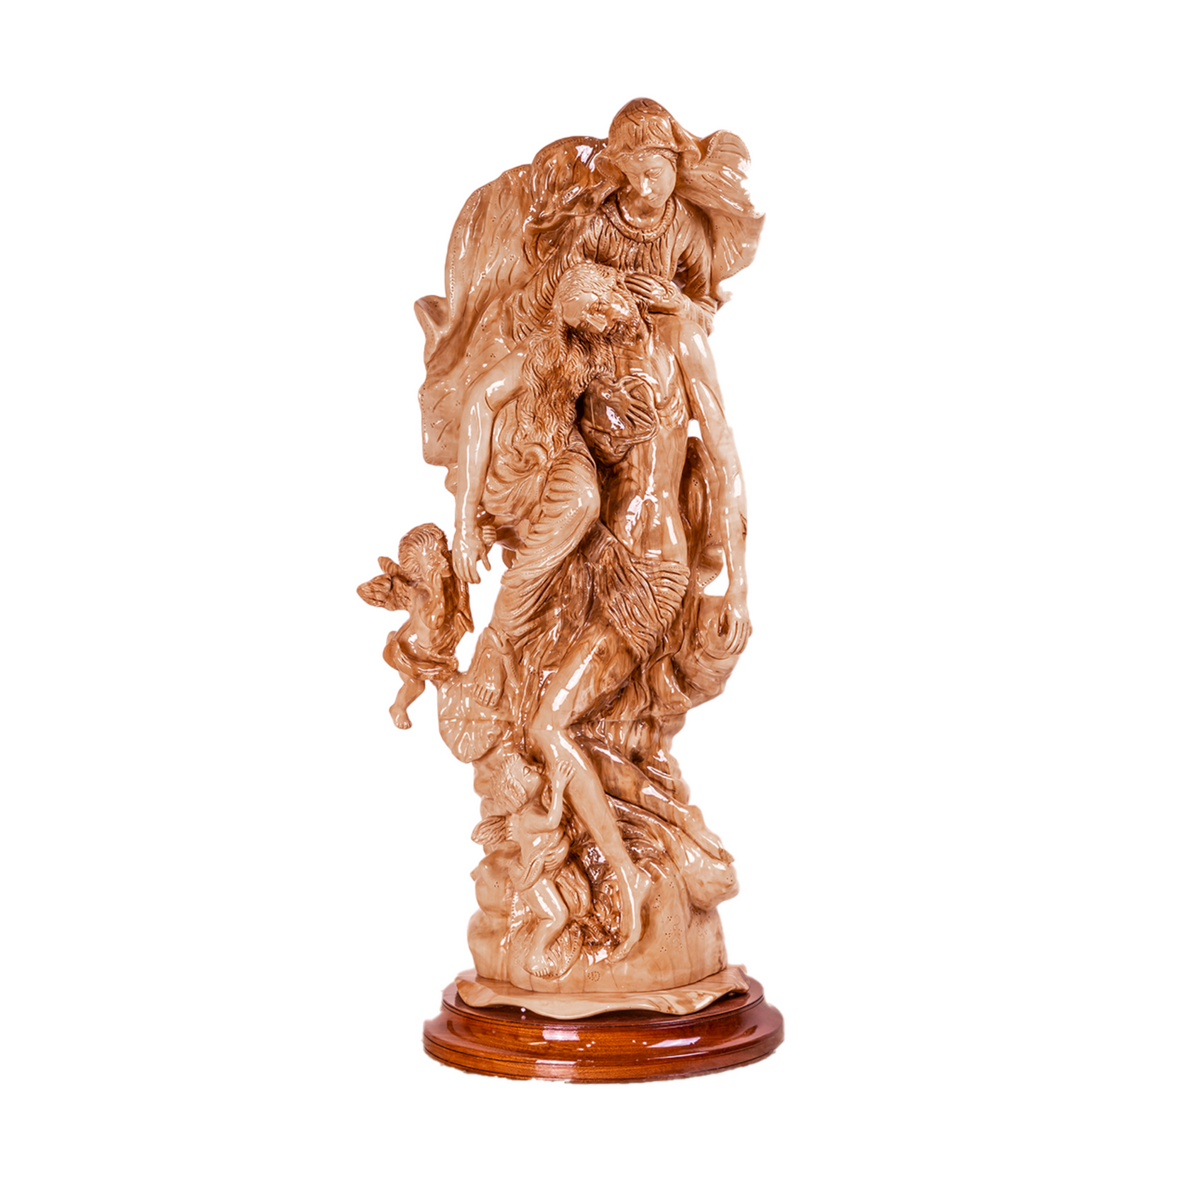 The Pieta, Cathedral Quality, Size: 32" Height